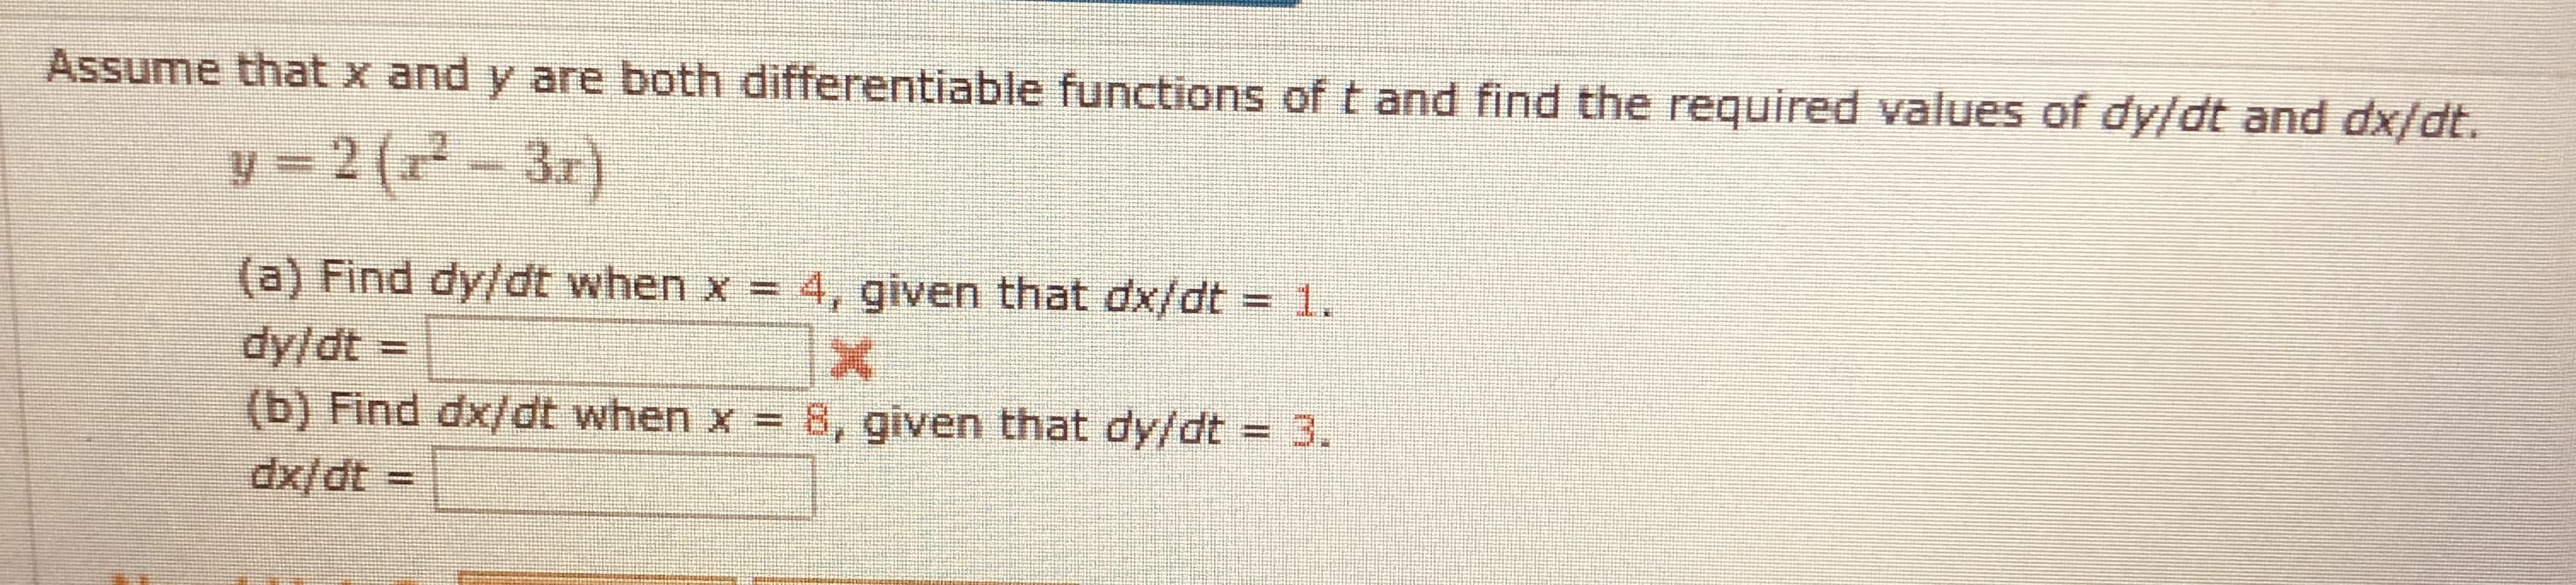 Assume that x and y are both differentiable functions of t and find the required values of dy/dt and dx/dt.
y = 2 (r² - 3r)
3.r)
(a) Find dy/dt when x = 4, given that dx/dt = 1.
dy/dt =
(b) Find dx/dt when x =
8, given that dy/dt = 3.
%3D
dx/dt =
%3D
